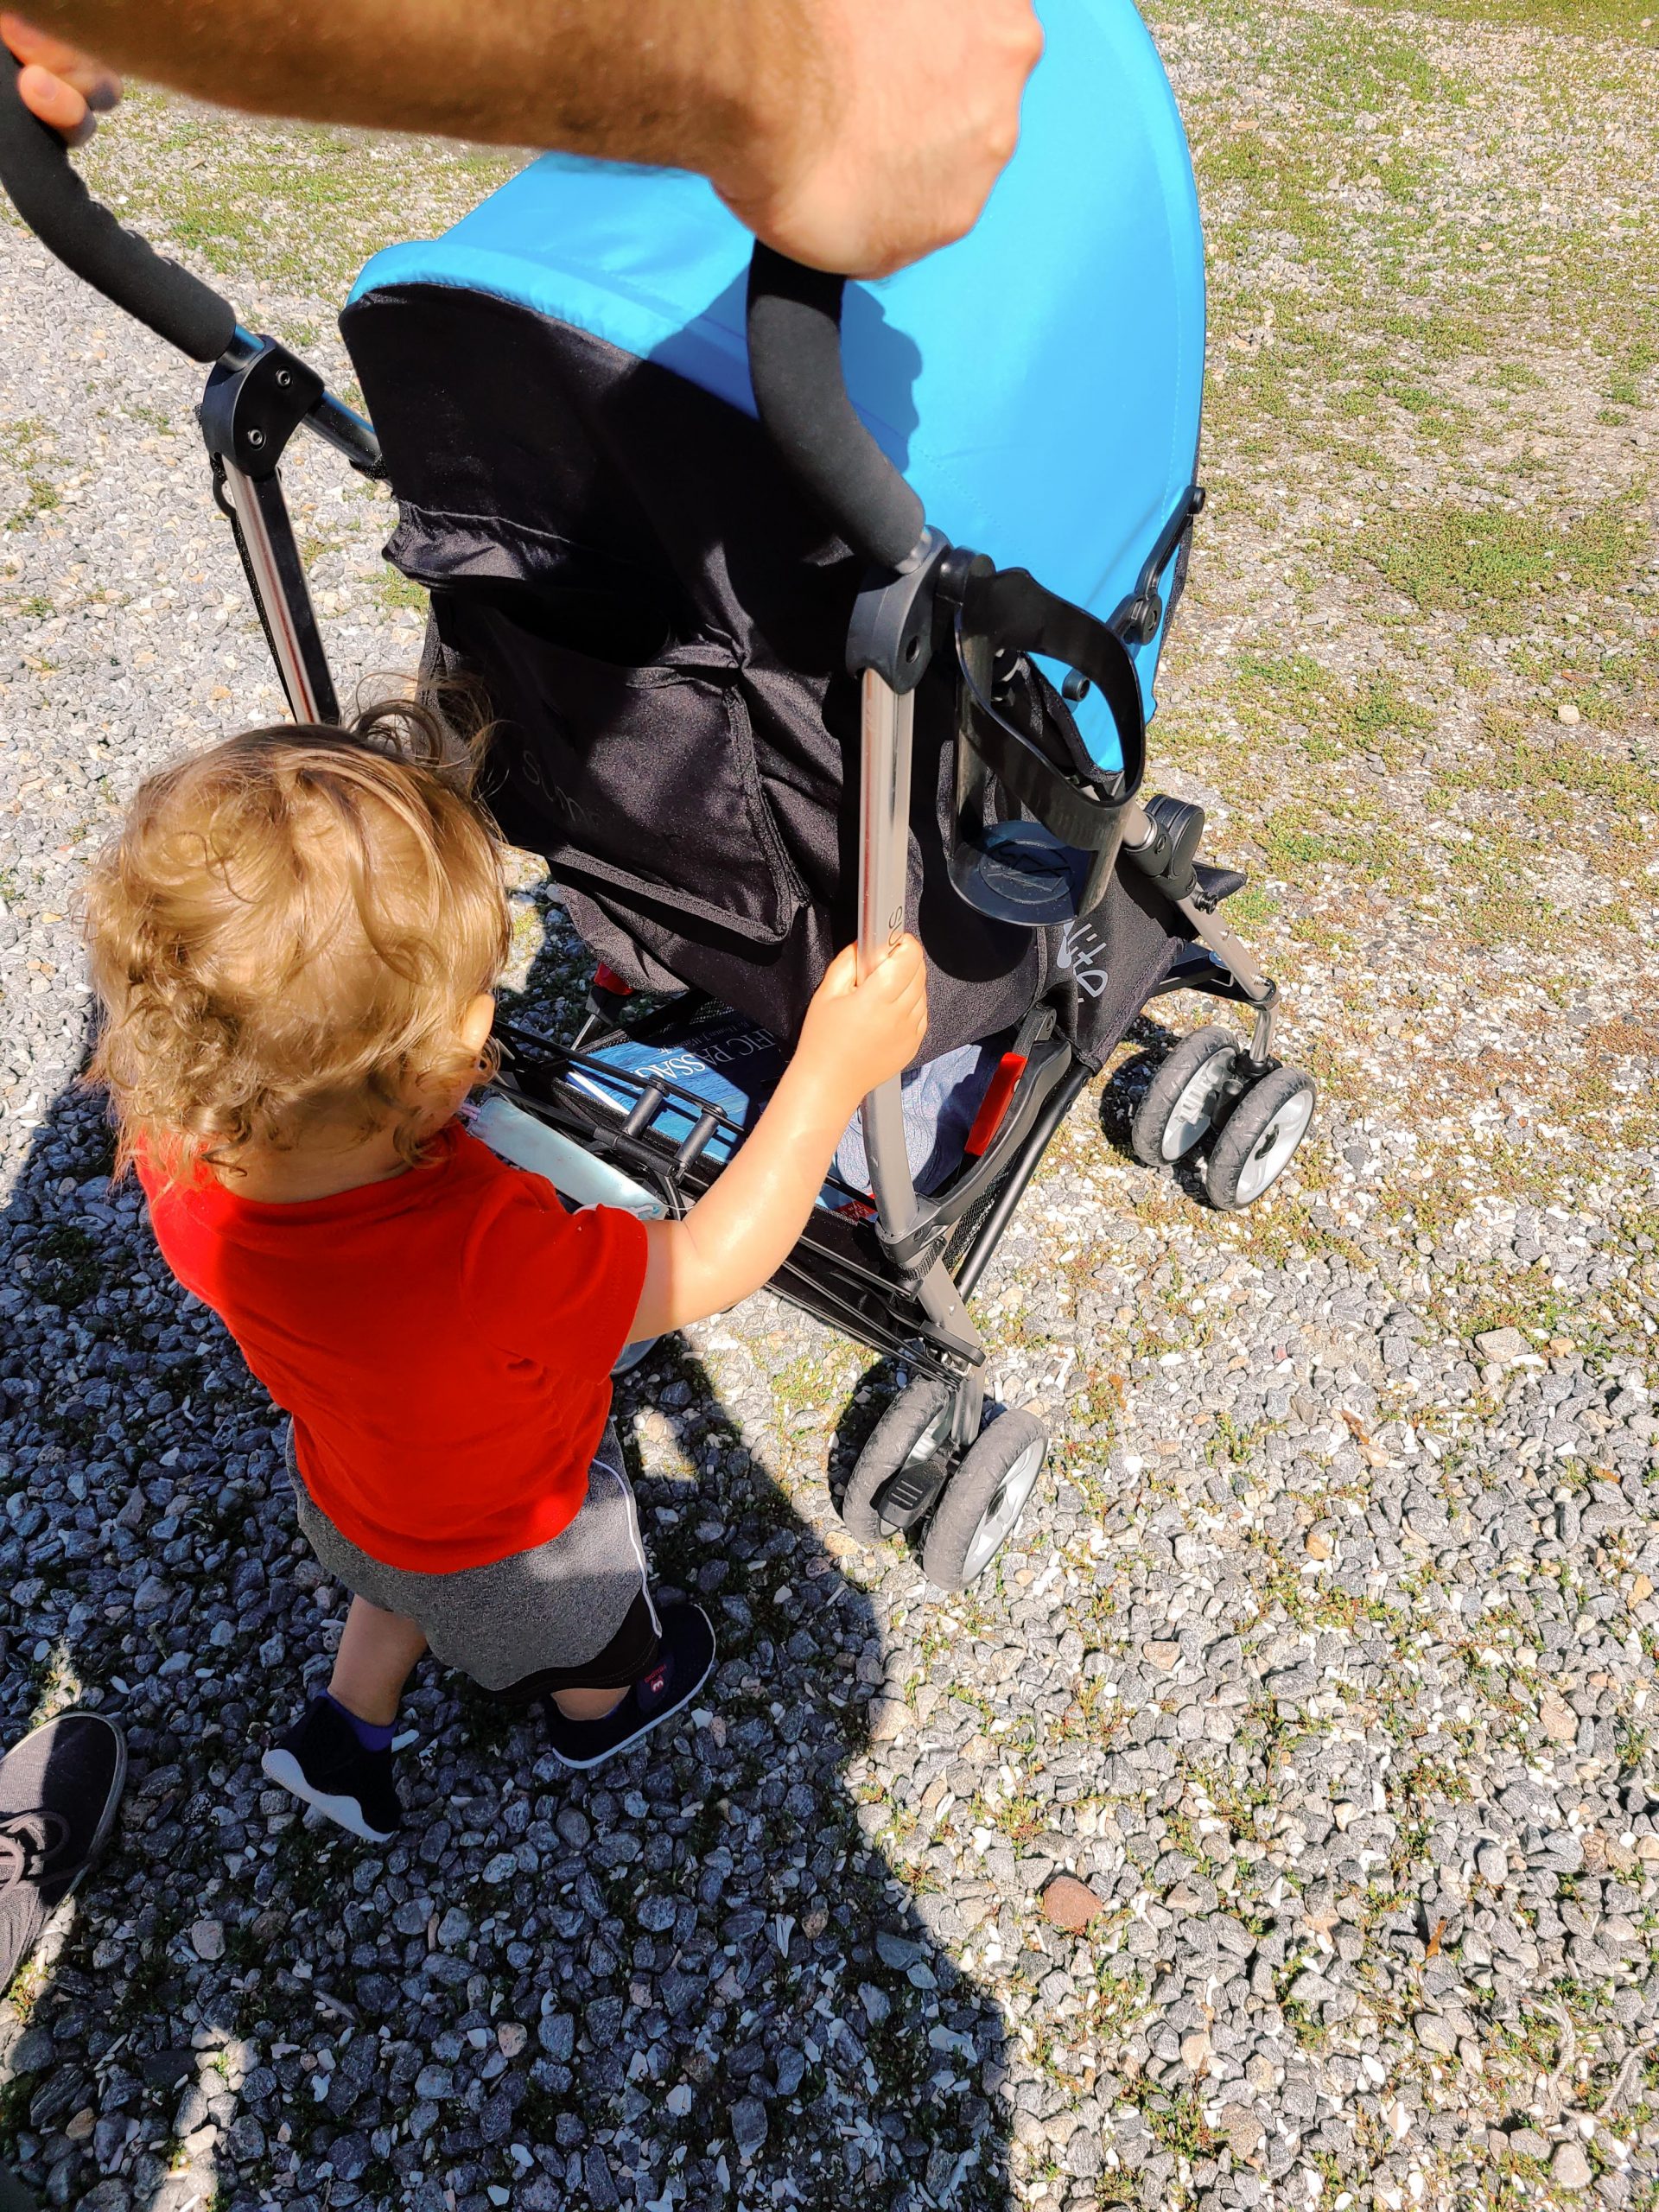 A child pushes a stroller